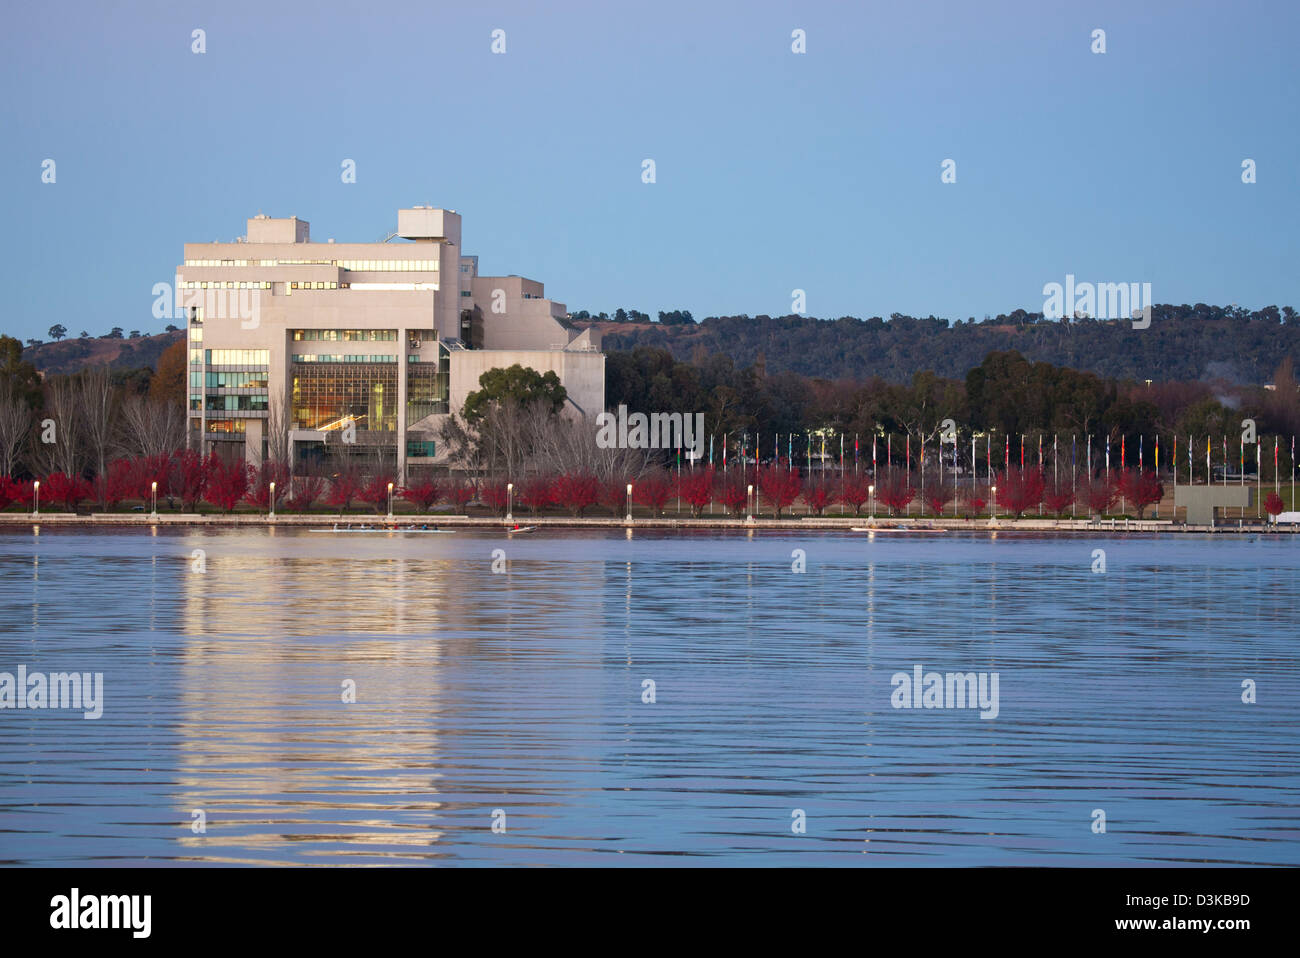 The High Court of Australia building is an outstanding example of late modern Brutalist architecture Canberra Australia Stock Photo